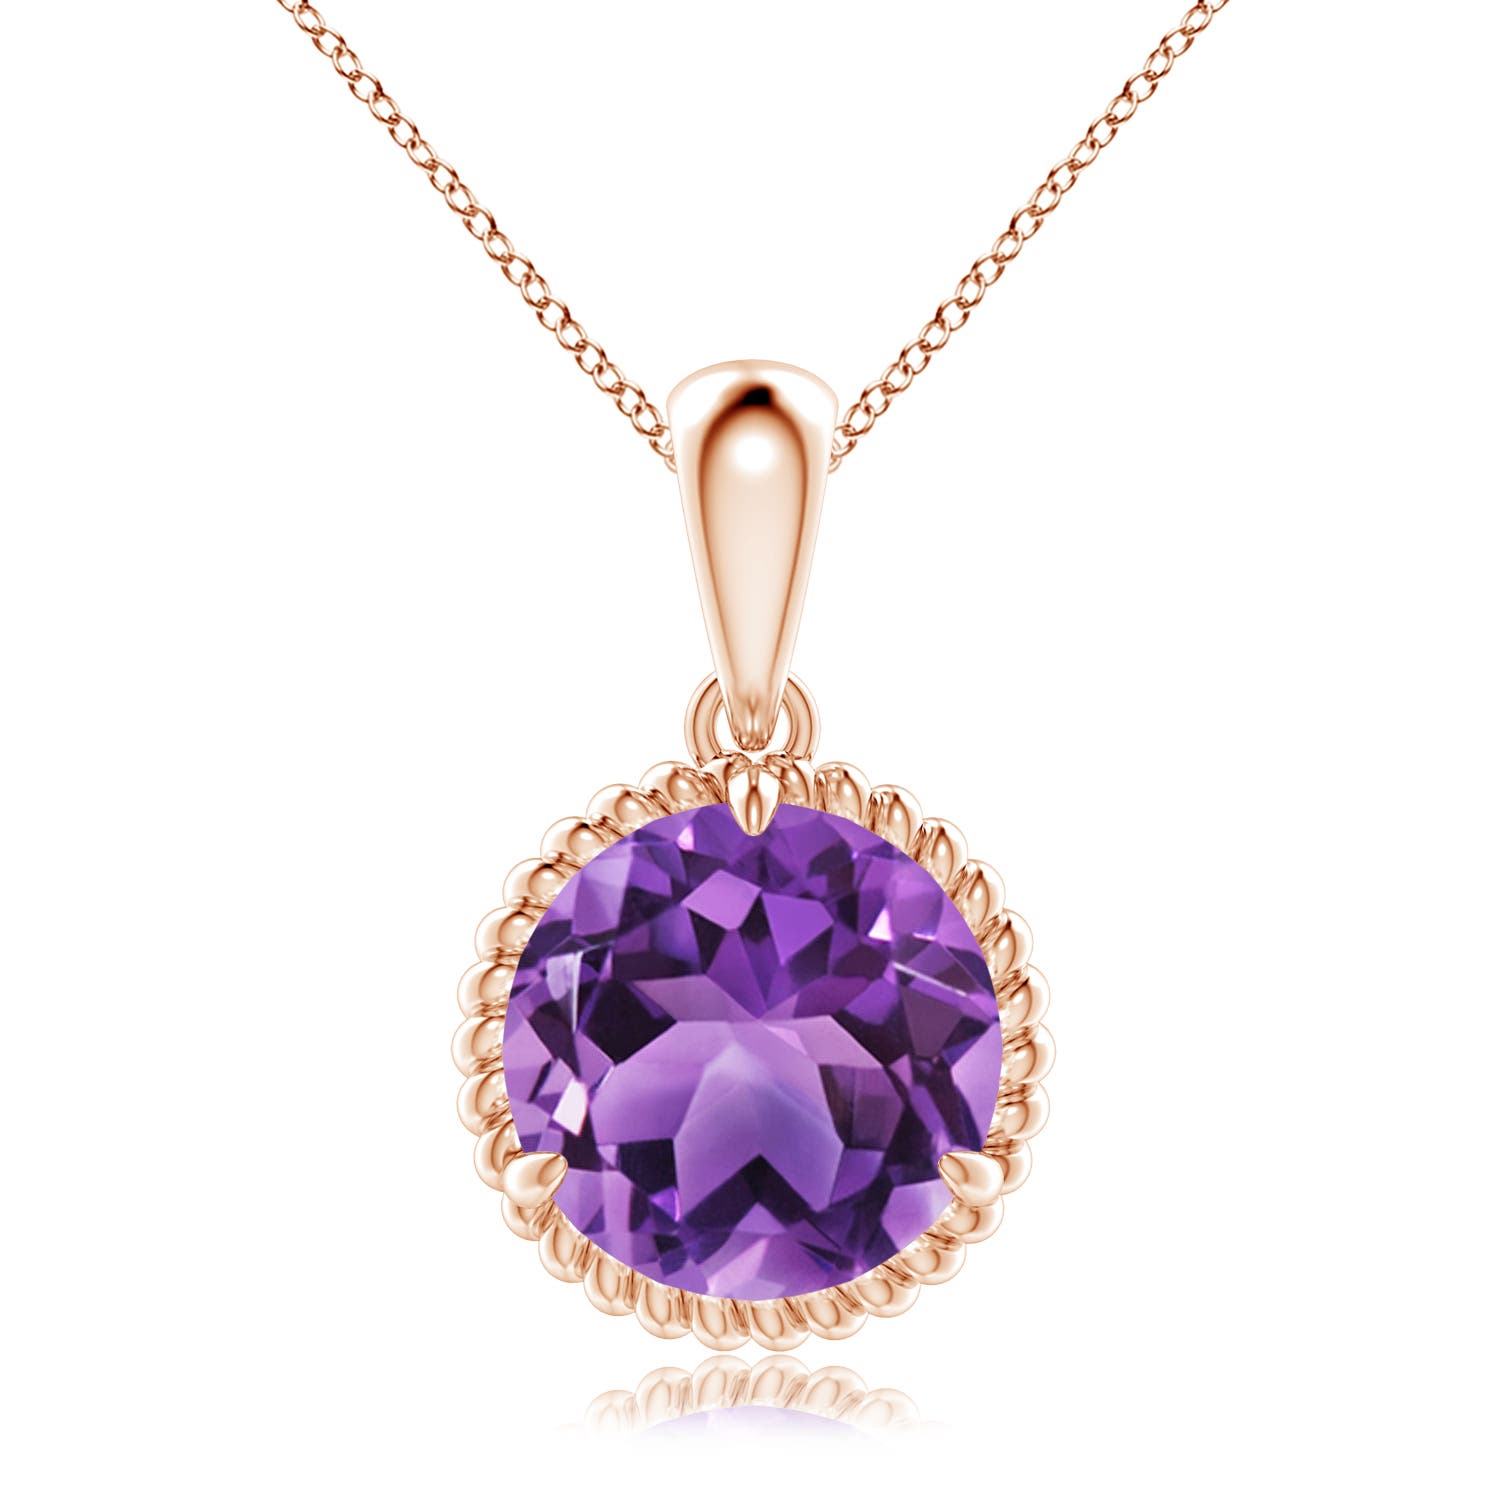 AA - Amethyst / 3.2 CT / 14 KT Rose Gold